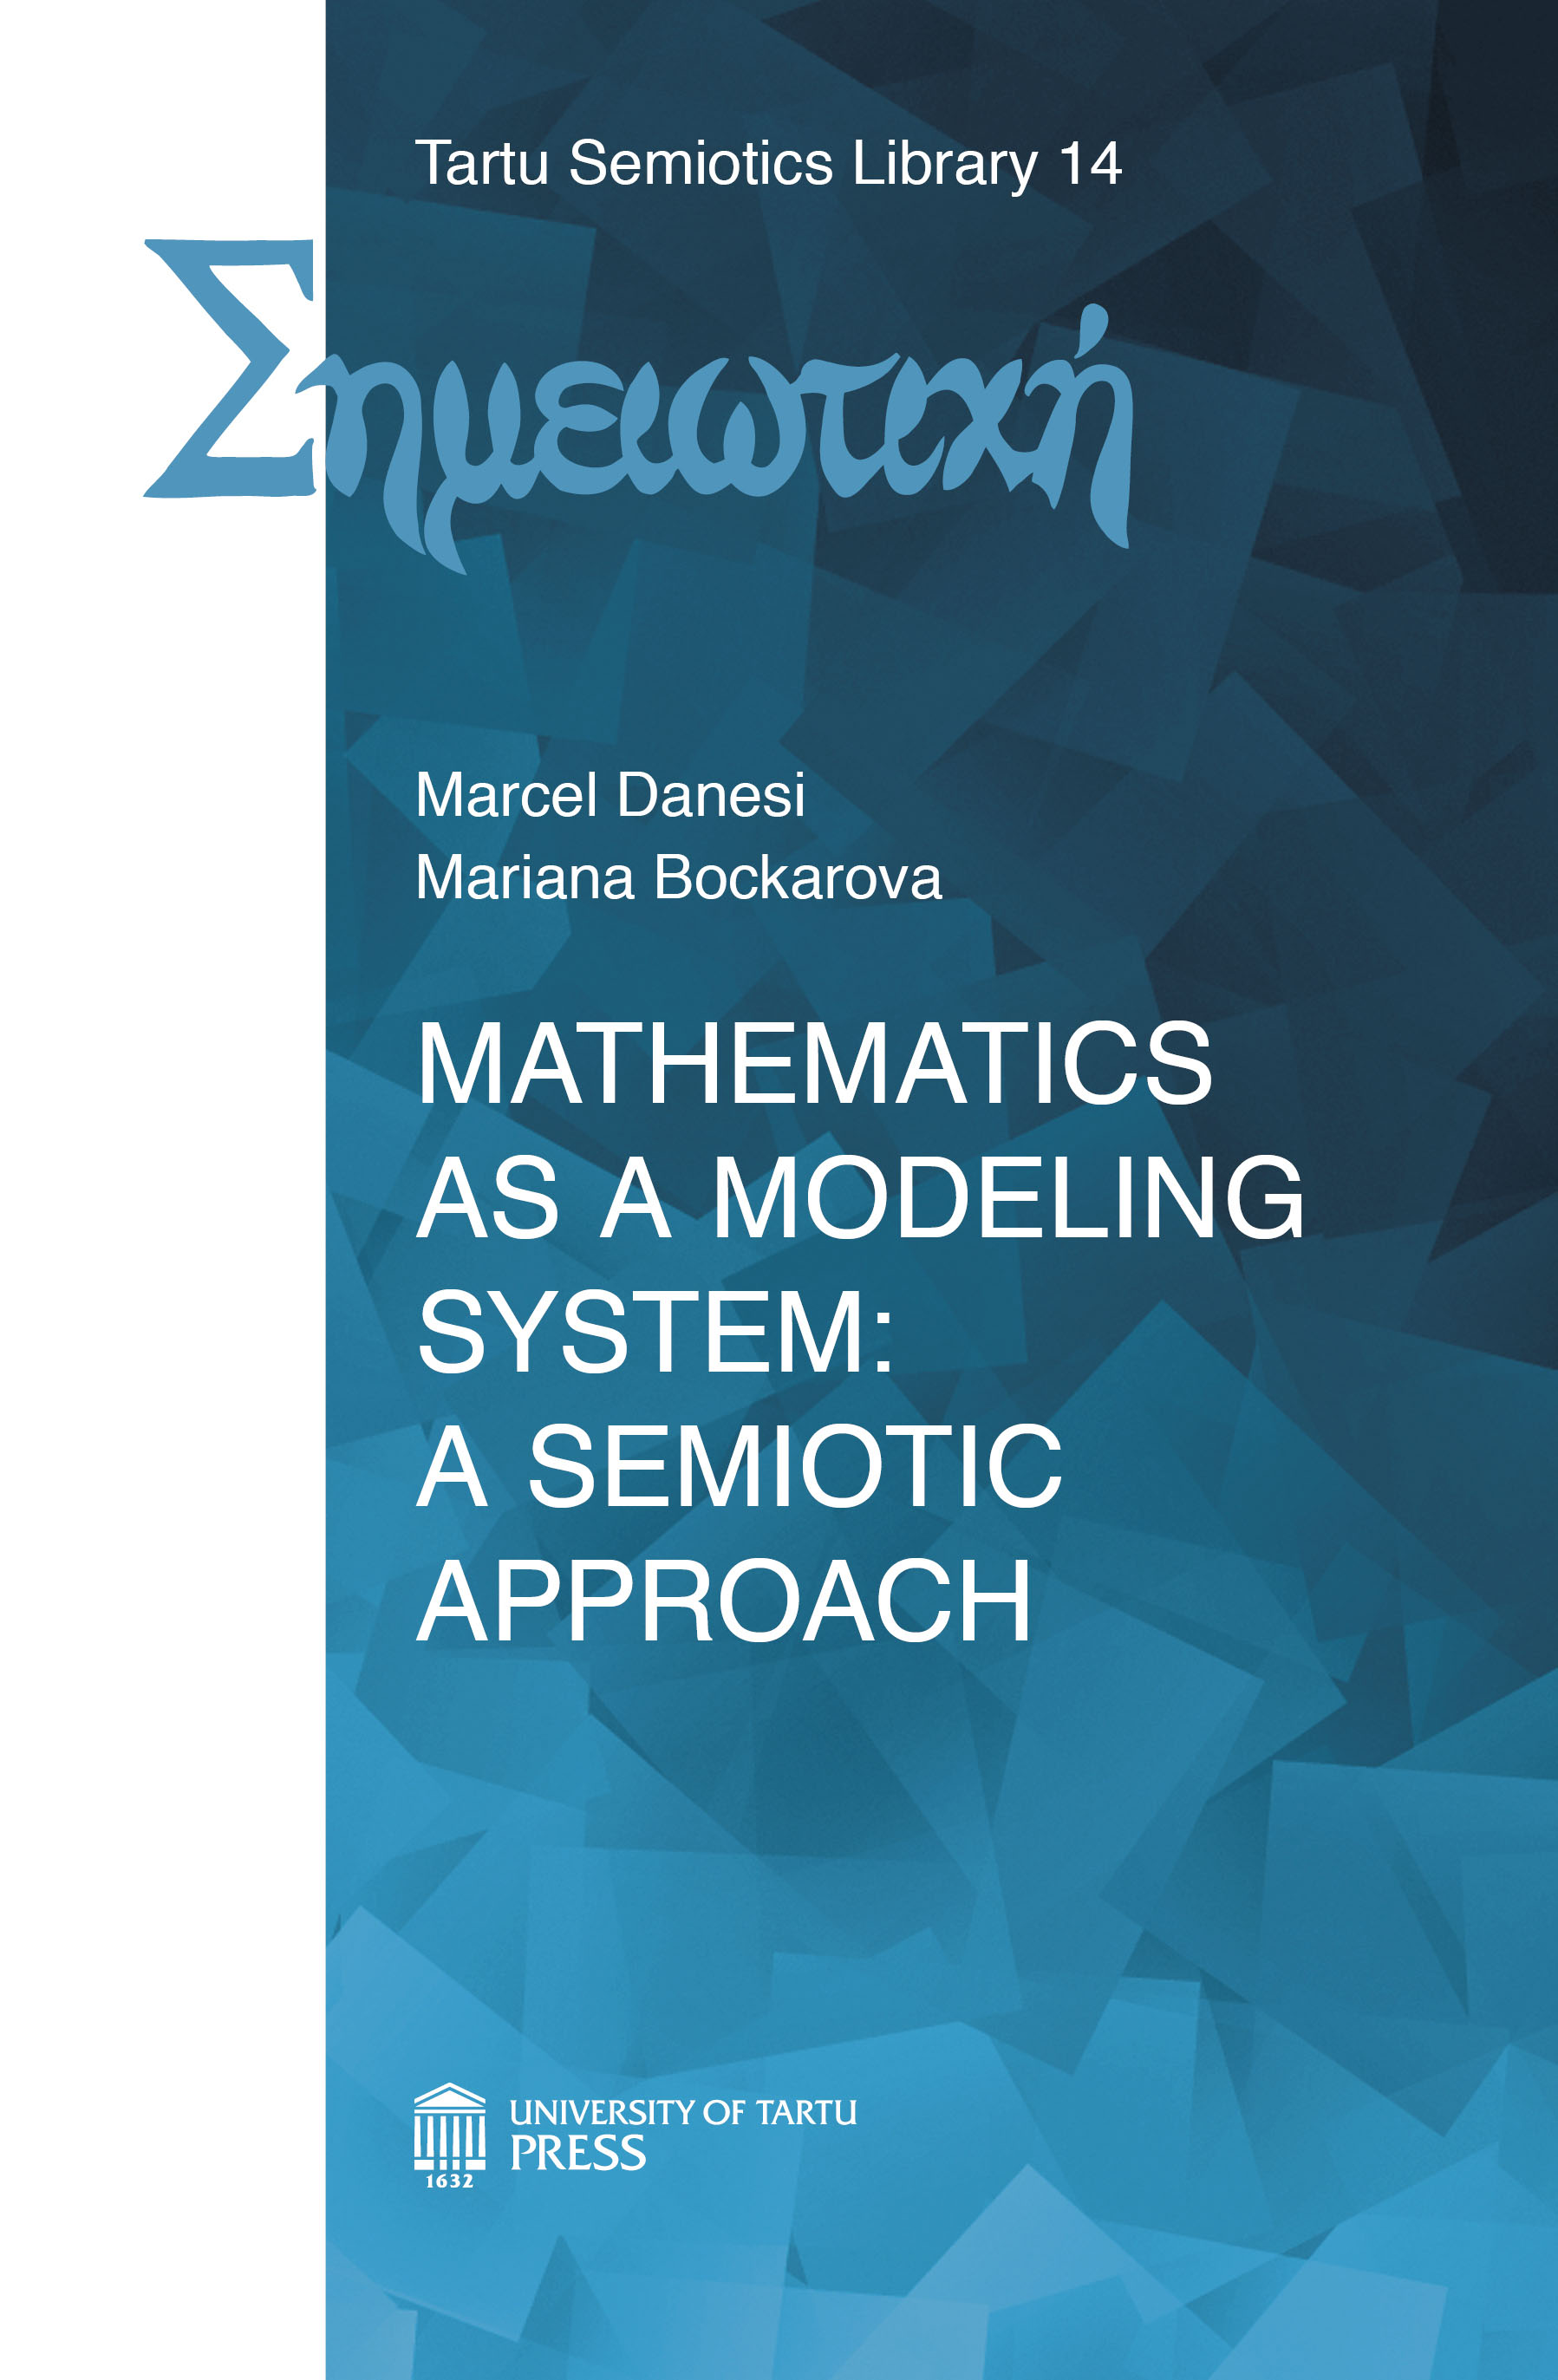 Blends and connective modeling in mathematics